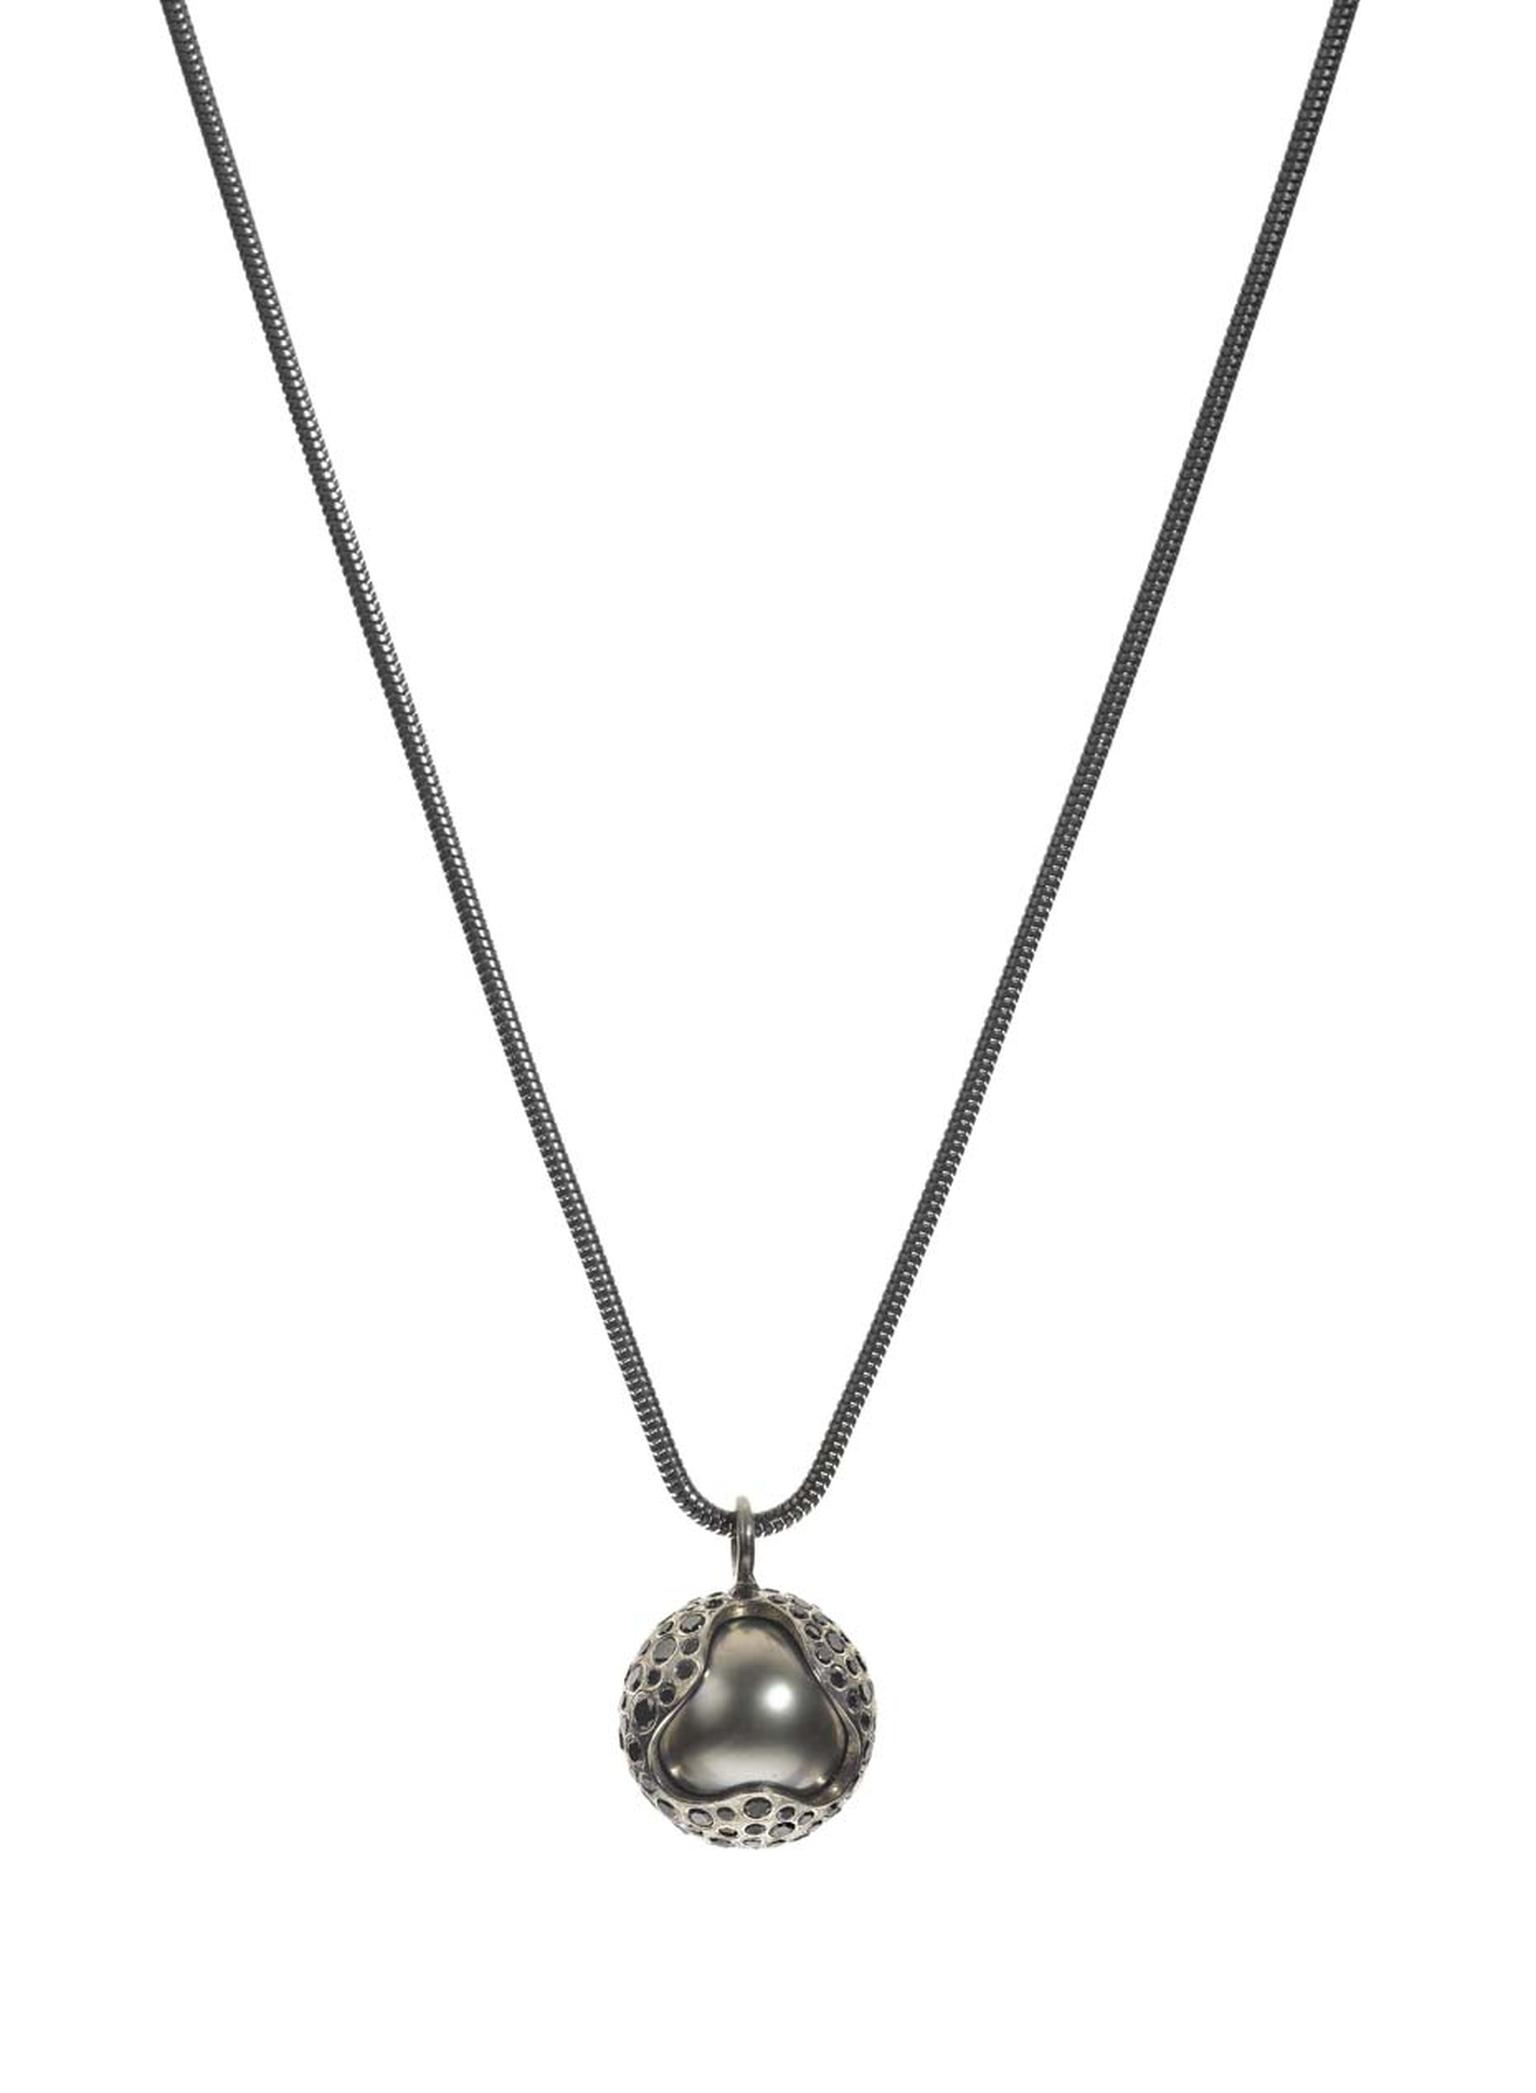 Todd Reed Tahitian pearl necklace in textured white gold, set with black diamonds